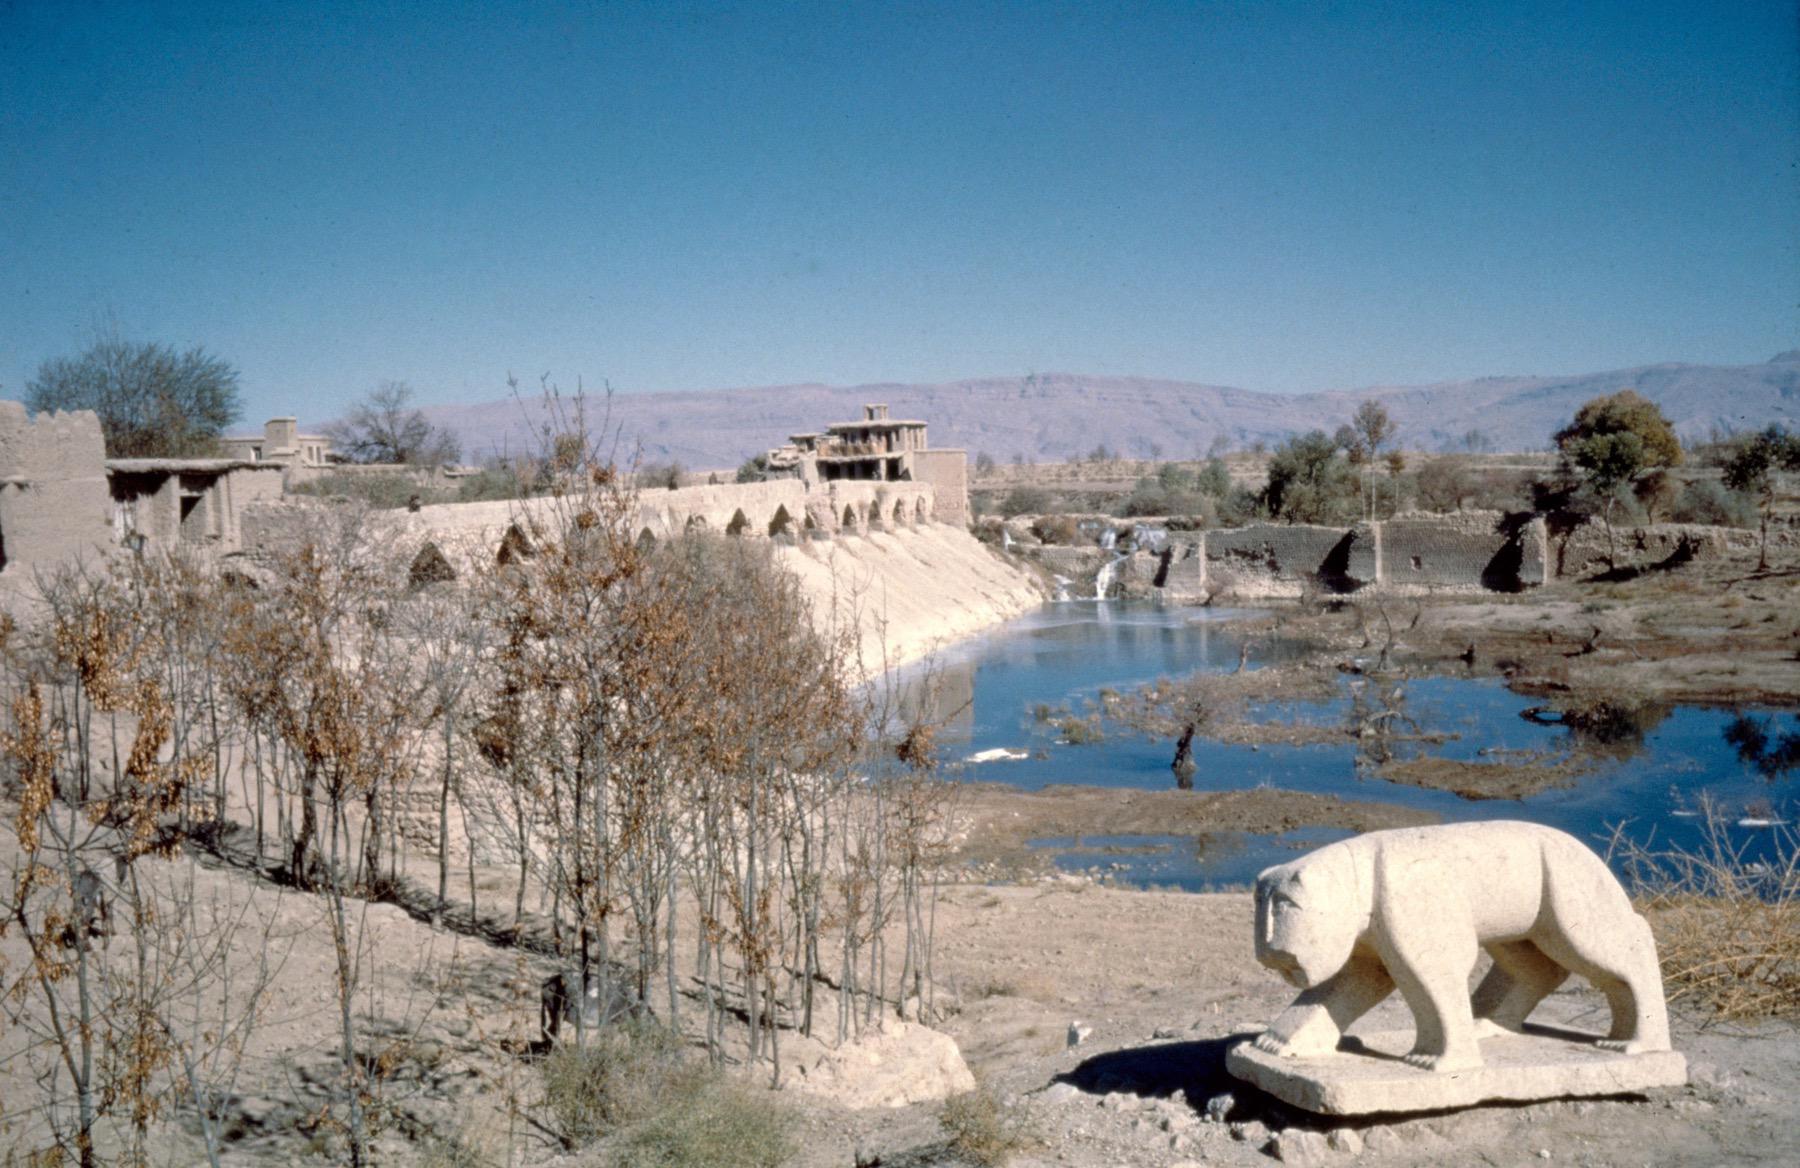 General view from south with lion tombstone in foreground